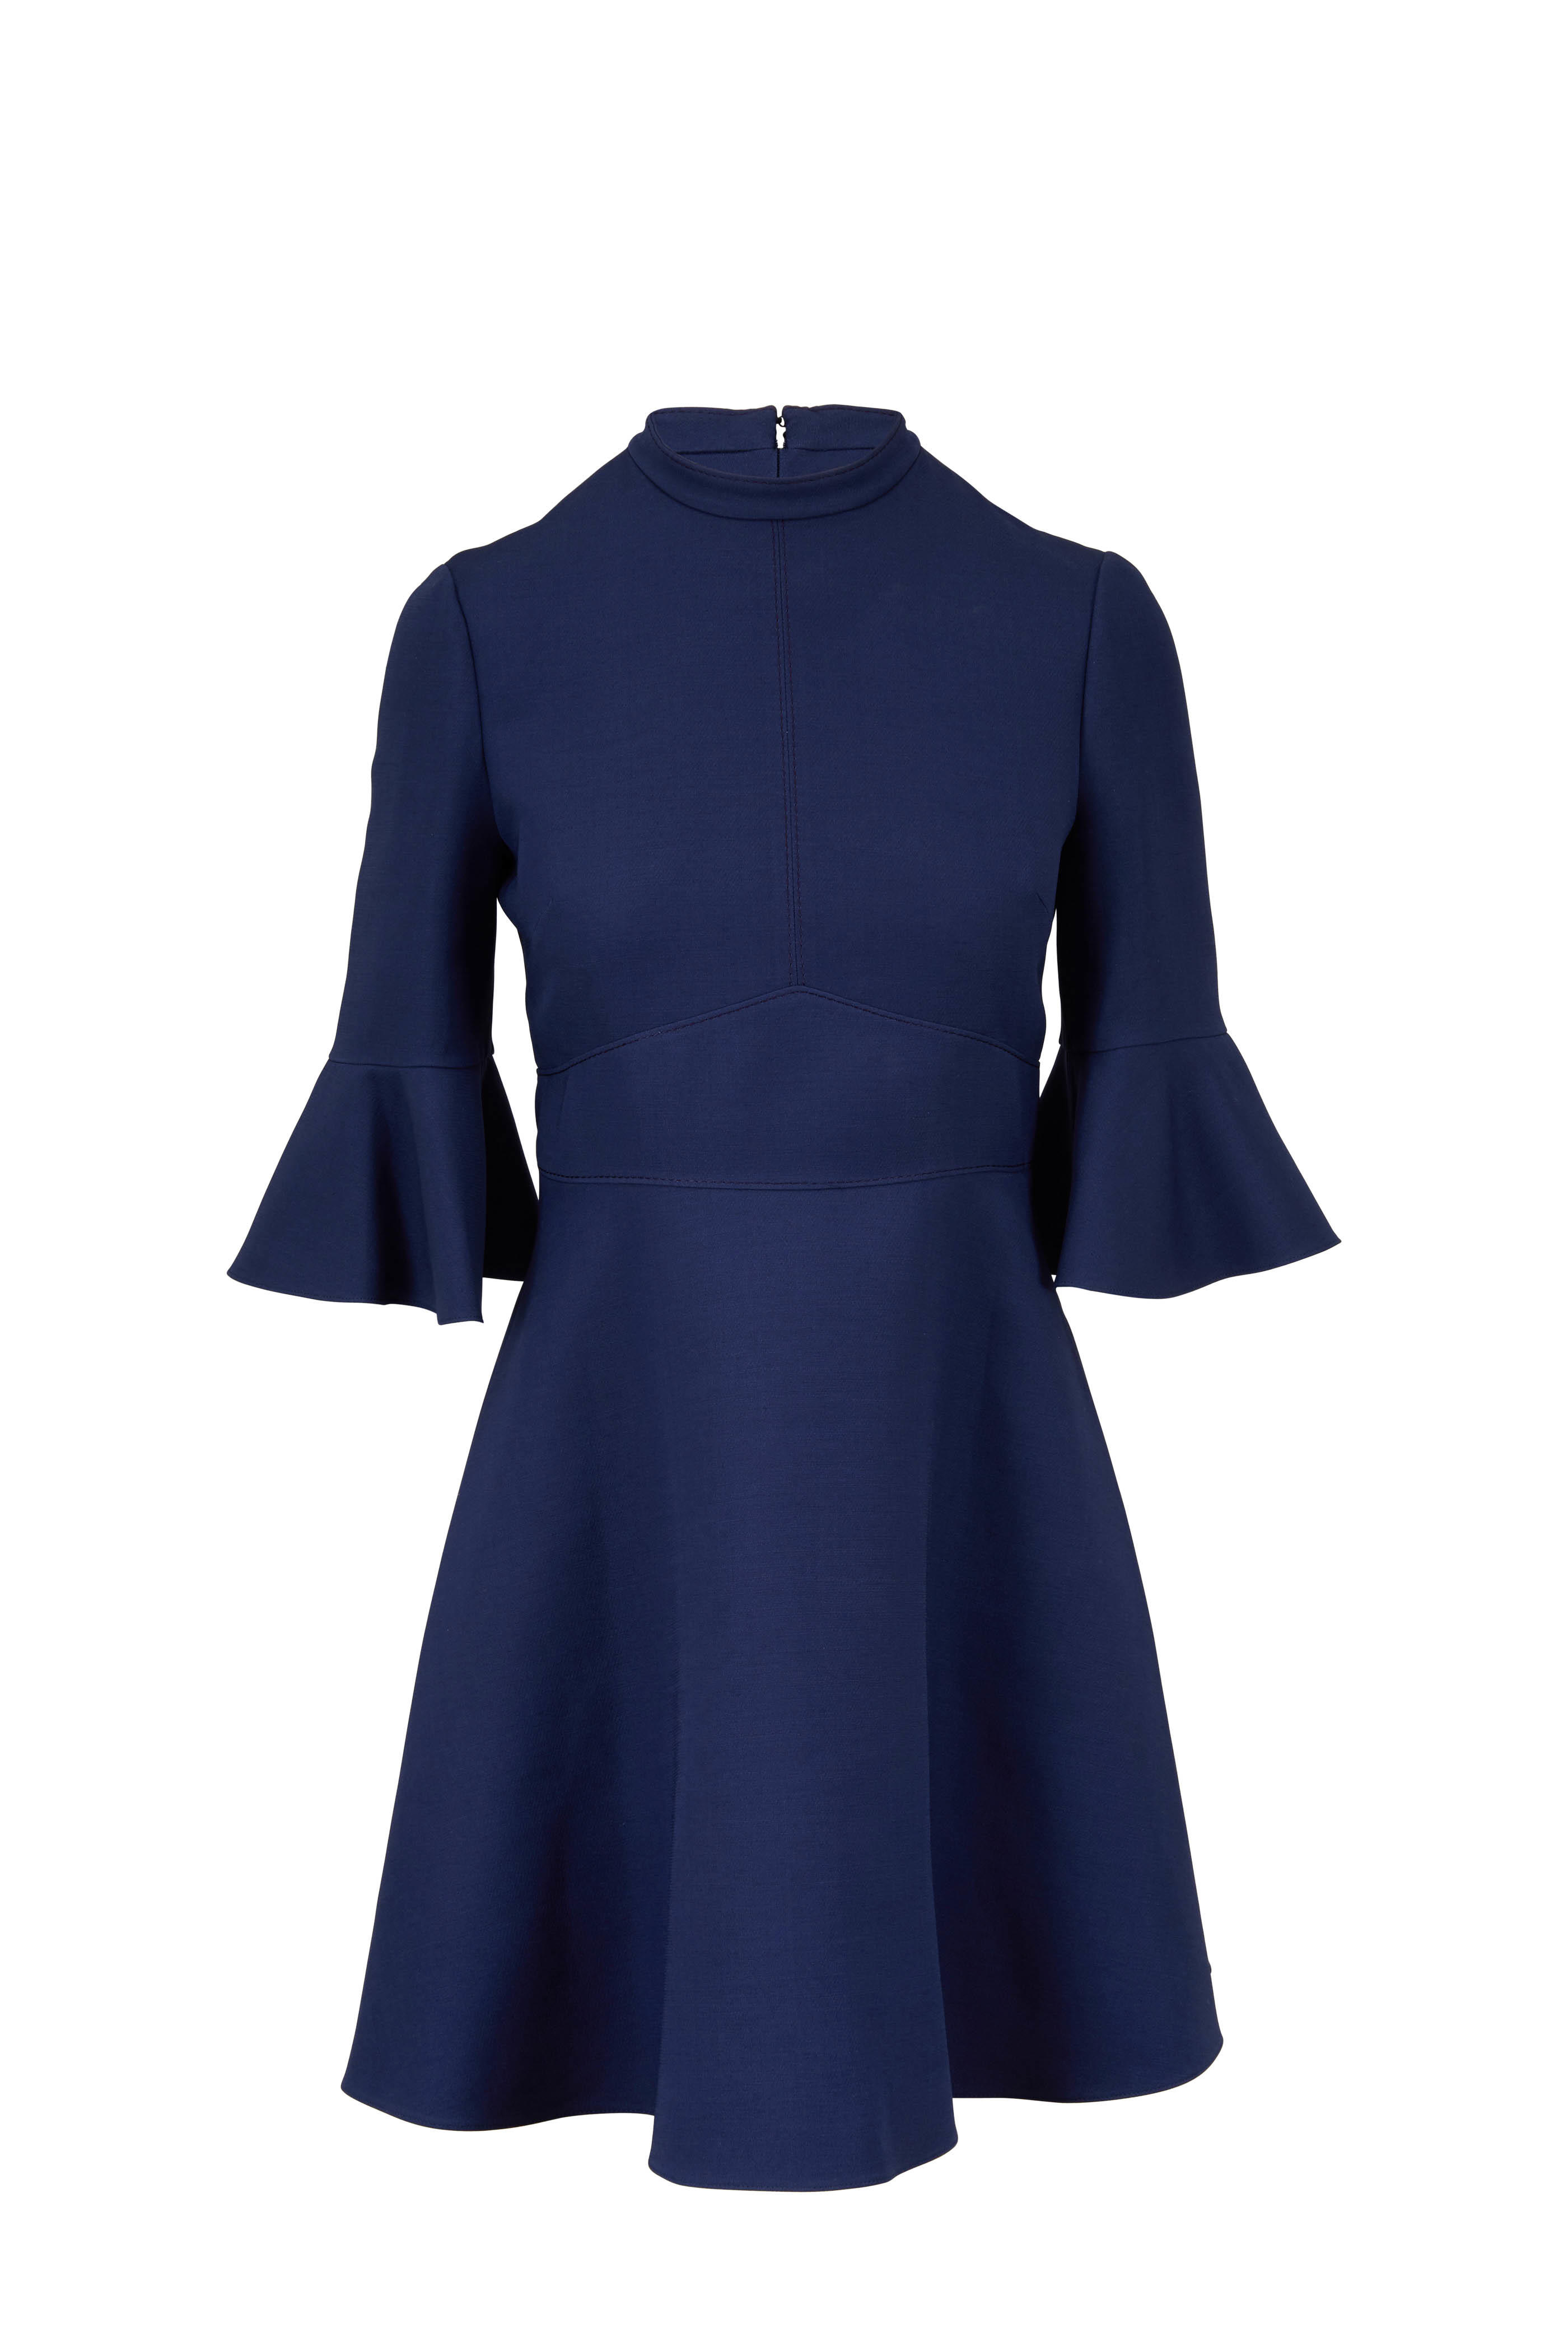 Navy Blue Crêpe Couture Bell Sleeve Dress